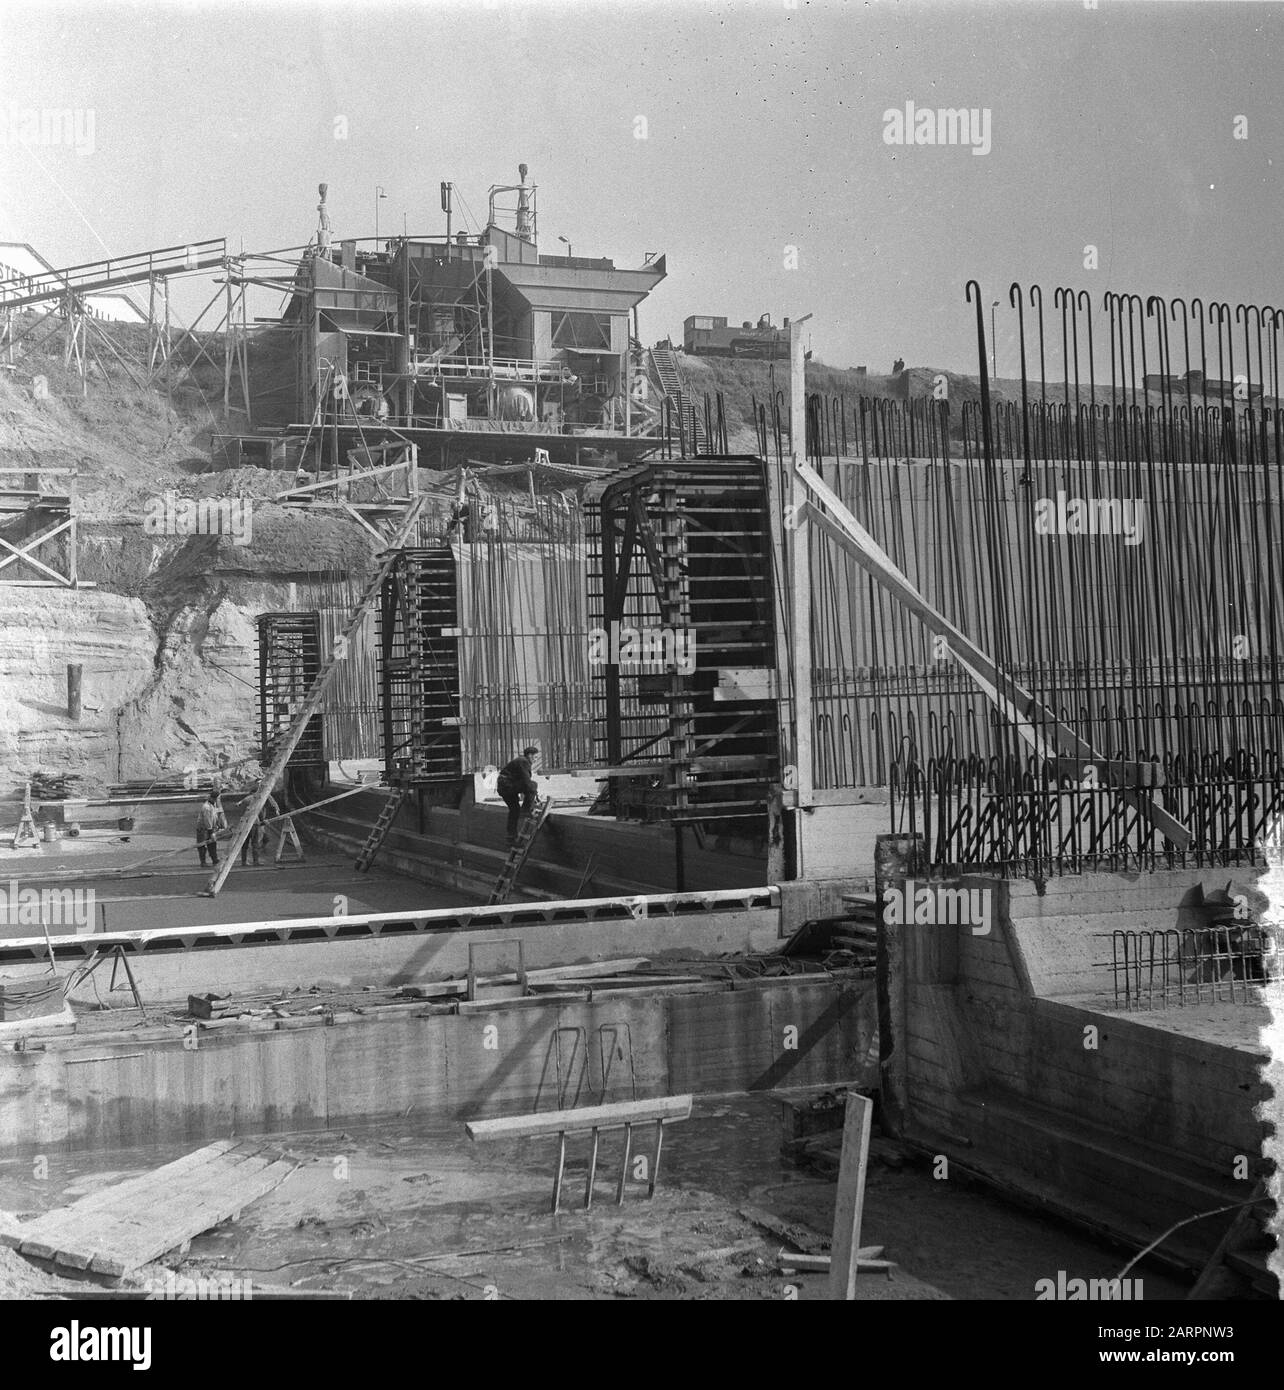 Velsertunnel under construction with seagoing ship Date: March 12, 1954 Keywords: under construction Institution name: Velsertunnel Stock Photo